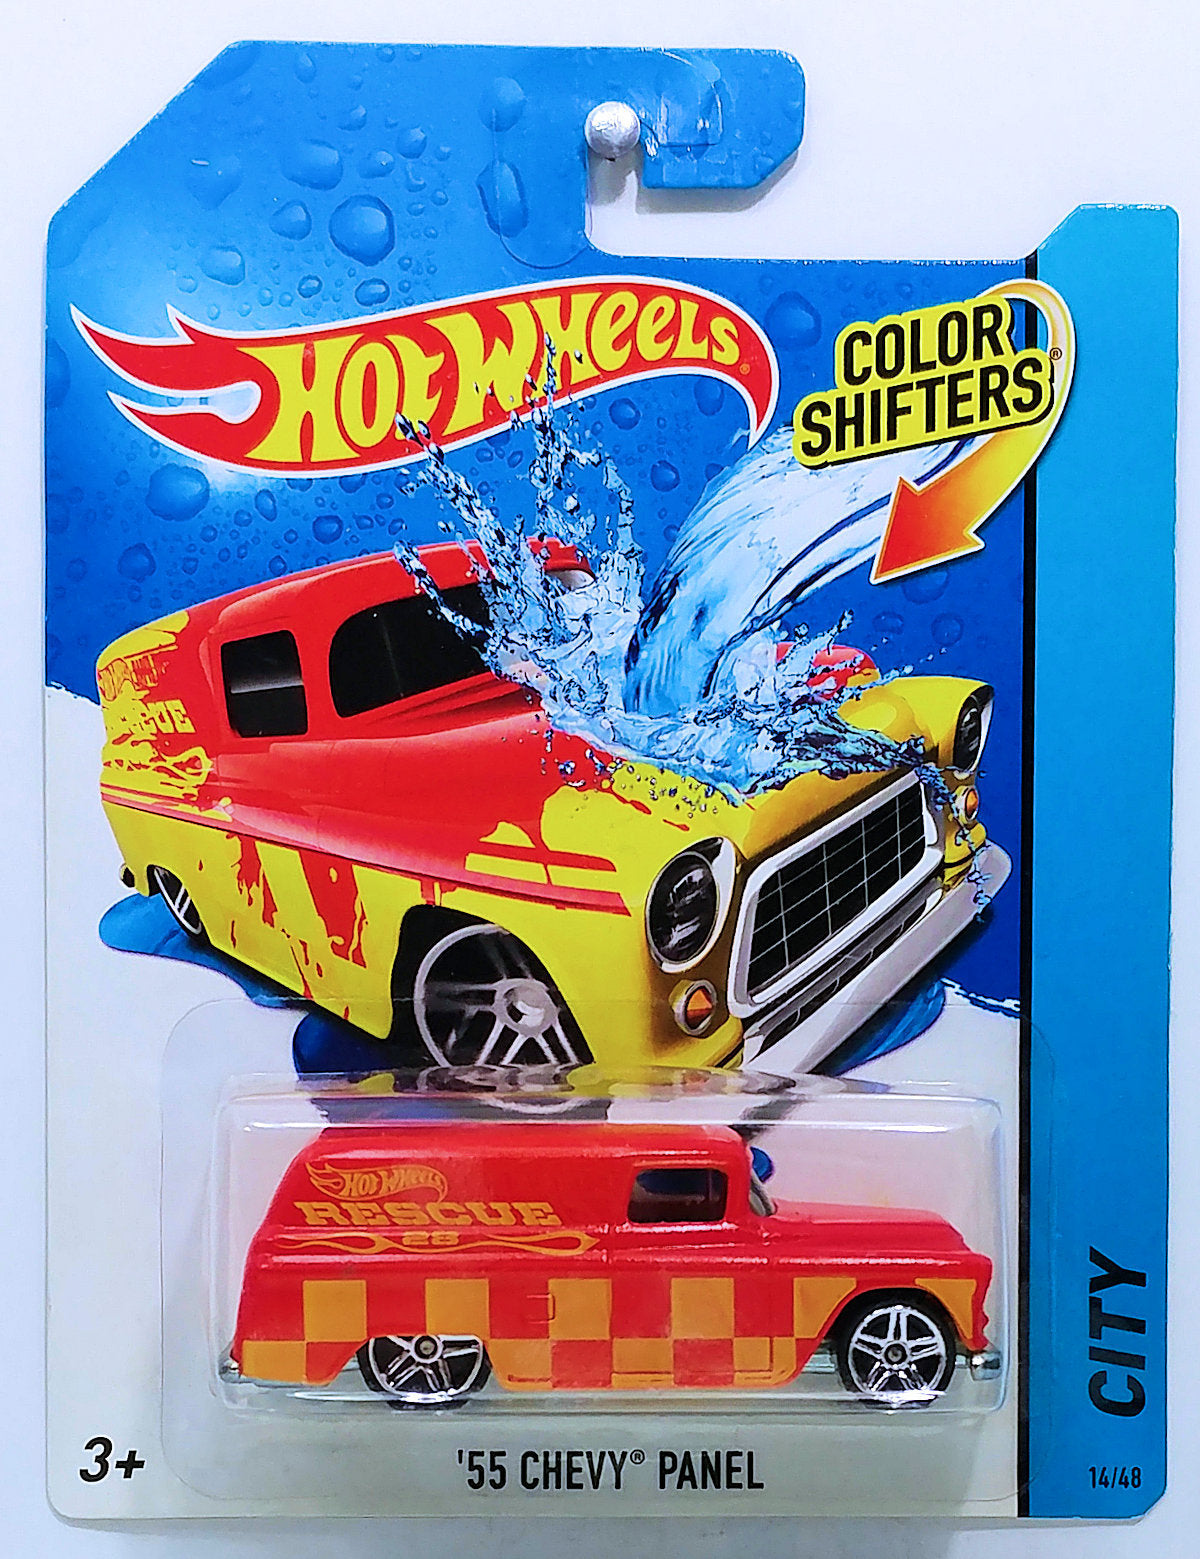 Hot Wheels 2014 - Color Shifters - City 14/48 - '55 Chevy Panel - Orange & Yellow